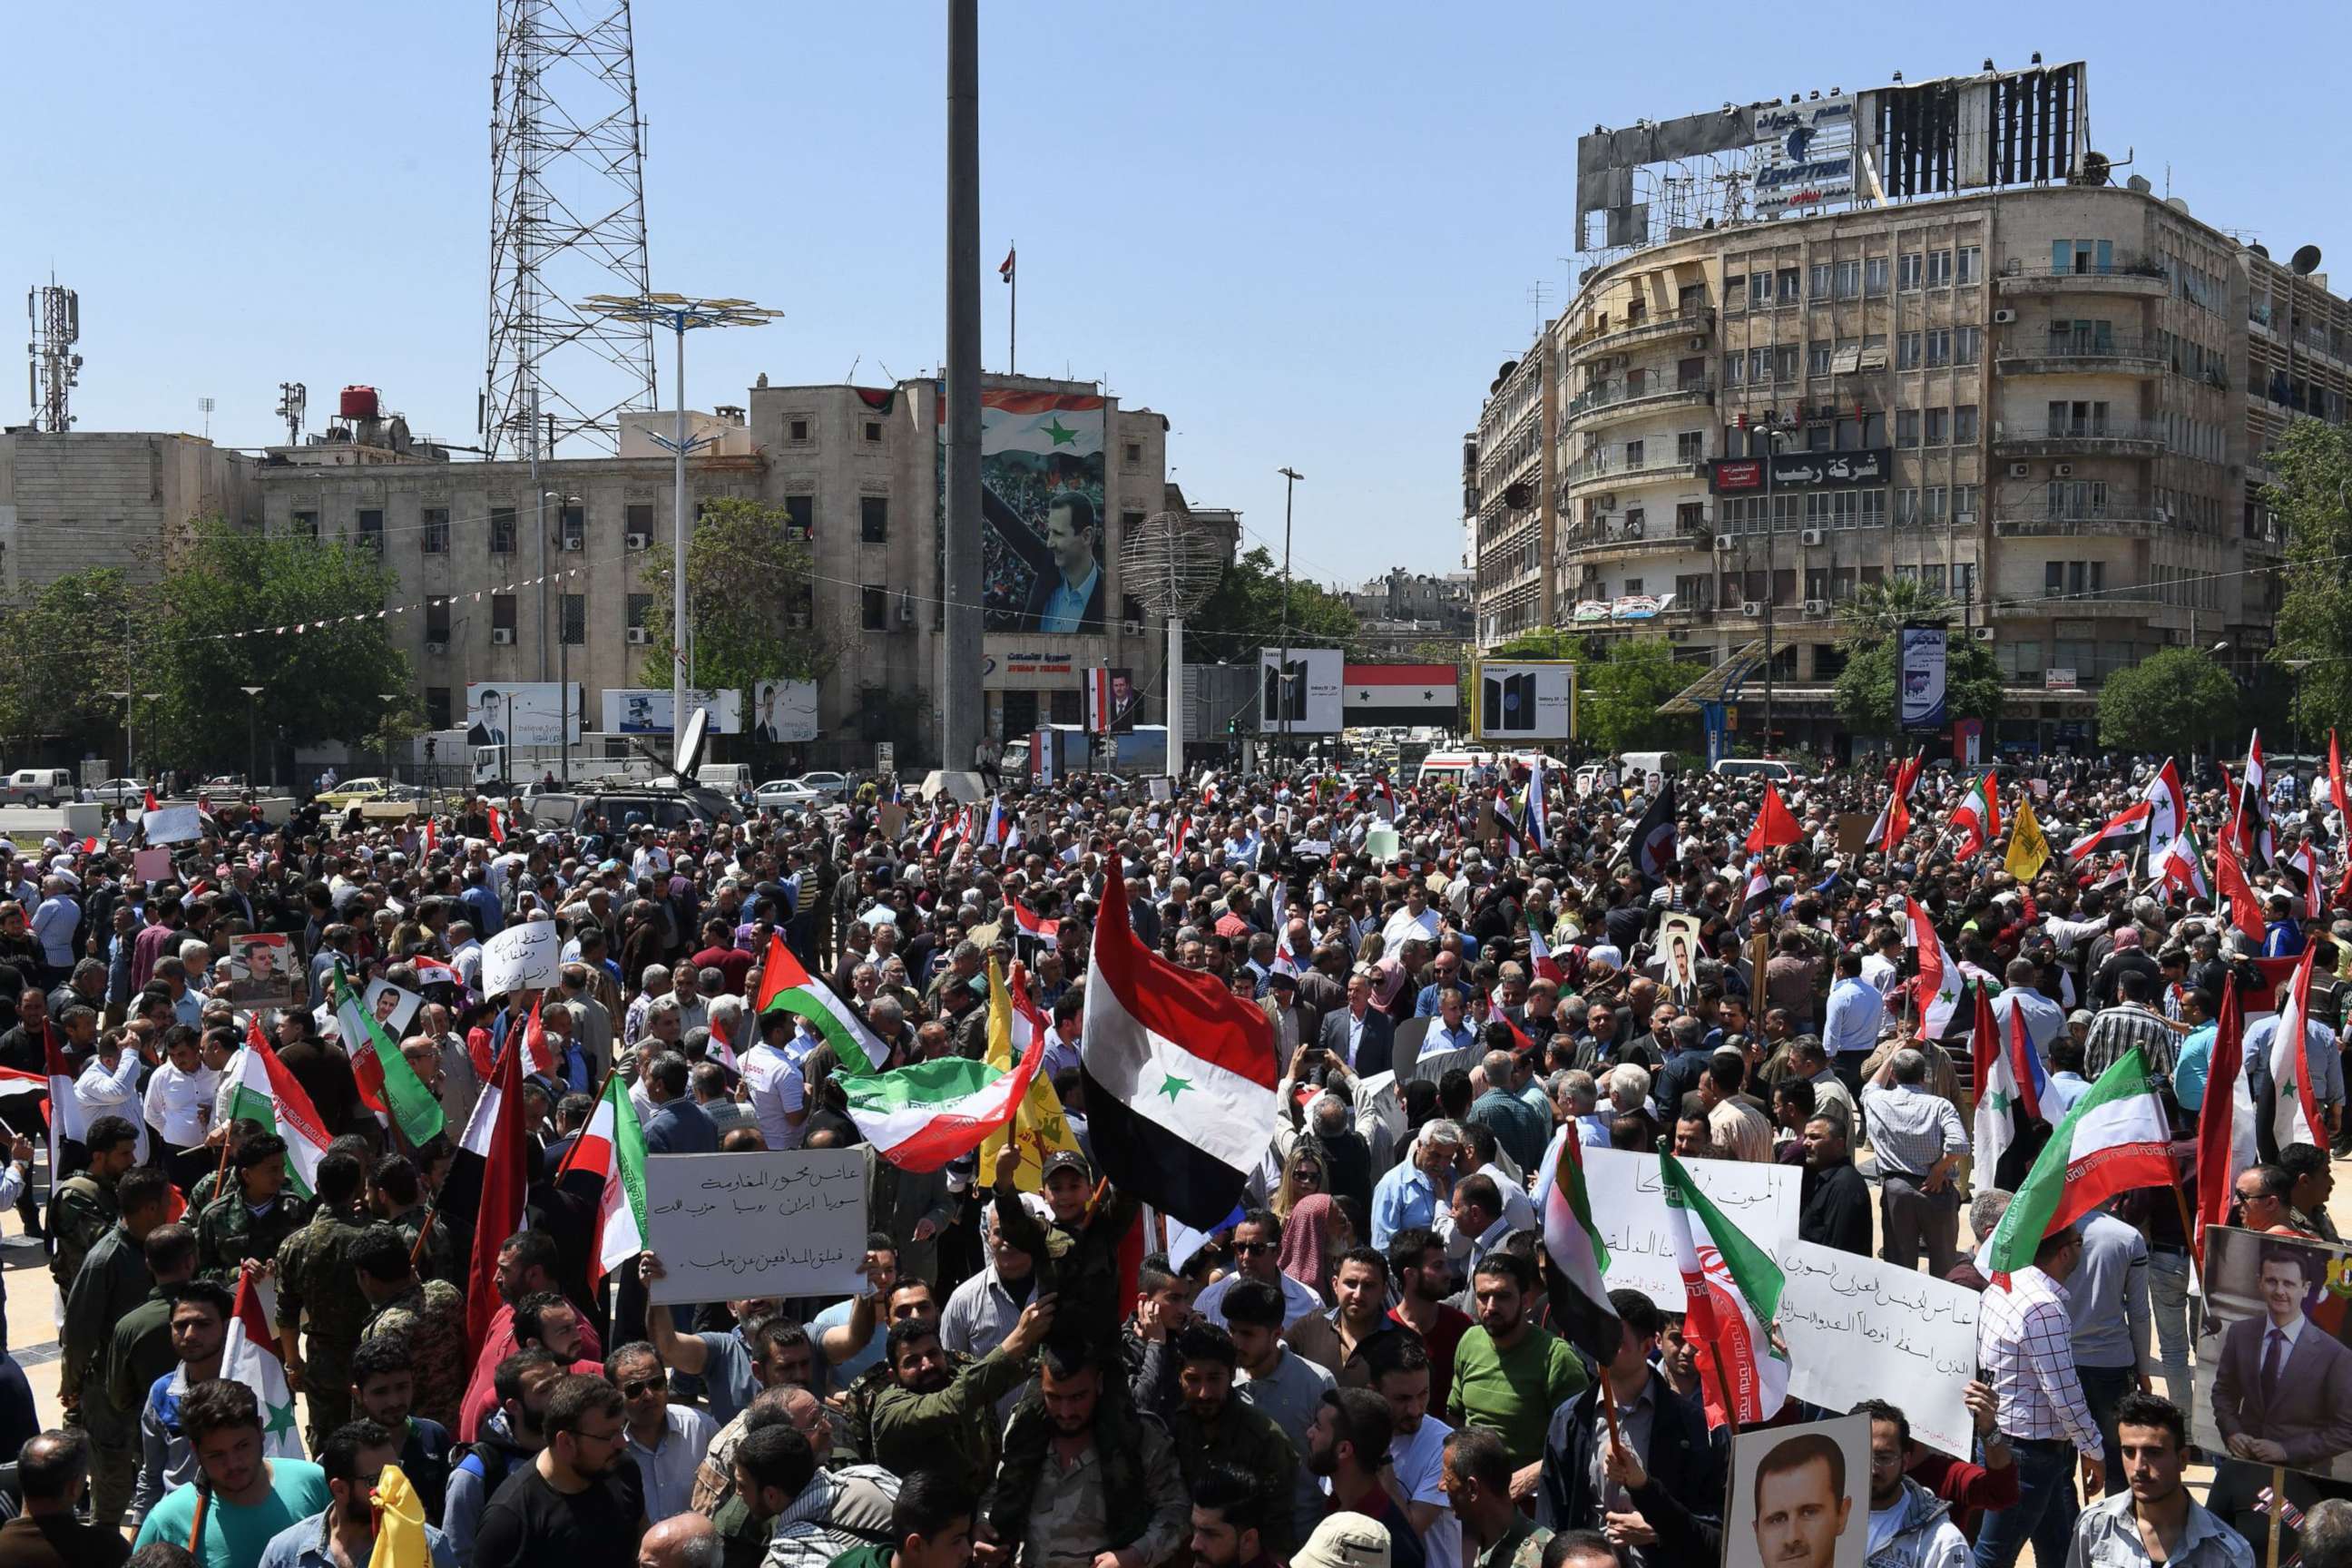 PHOTO: Syrians wave the national flag and portraits of President Bashar al-Assad as they gather in Aleppo's Saadallah al-Jabiri square, April 14, 2018, to condemn the strikes carried out by the United States, Britain and France against the Syrian regime.